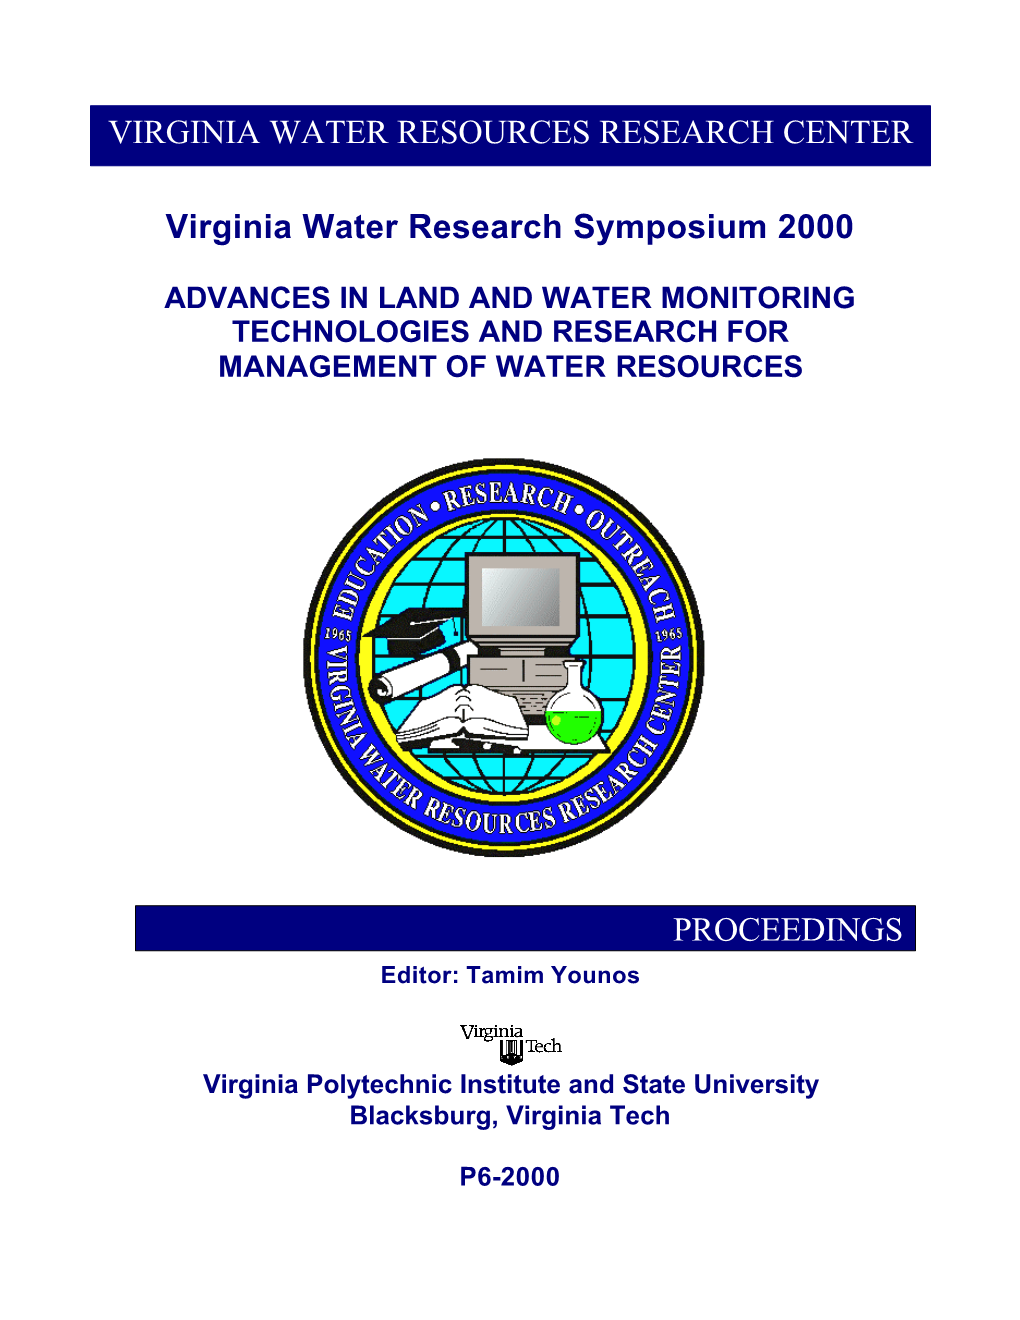 Virginia Water Resources Research Center Proceedings